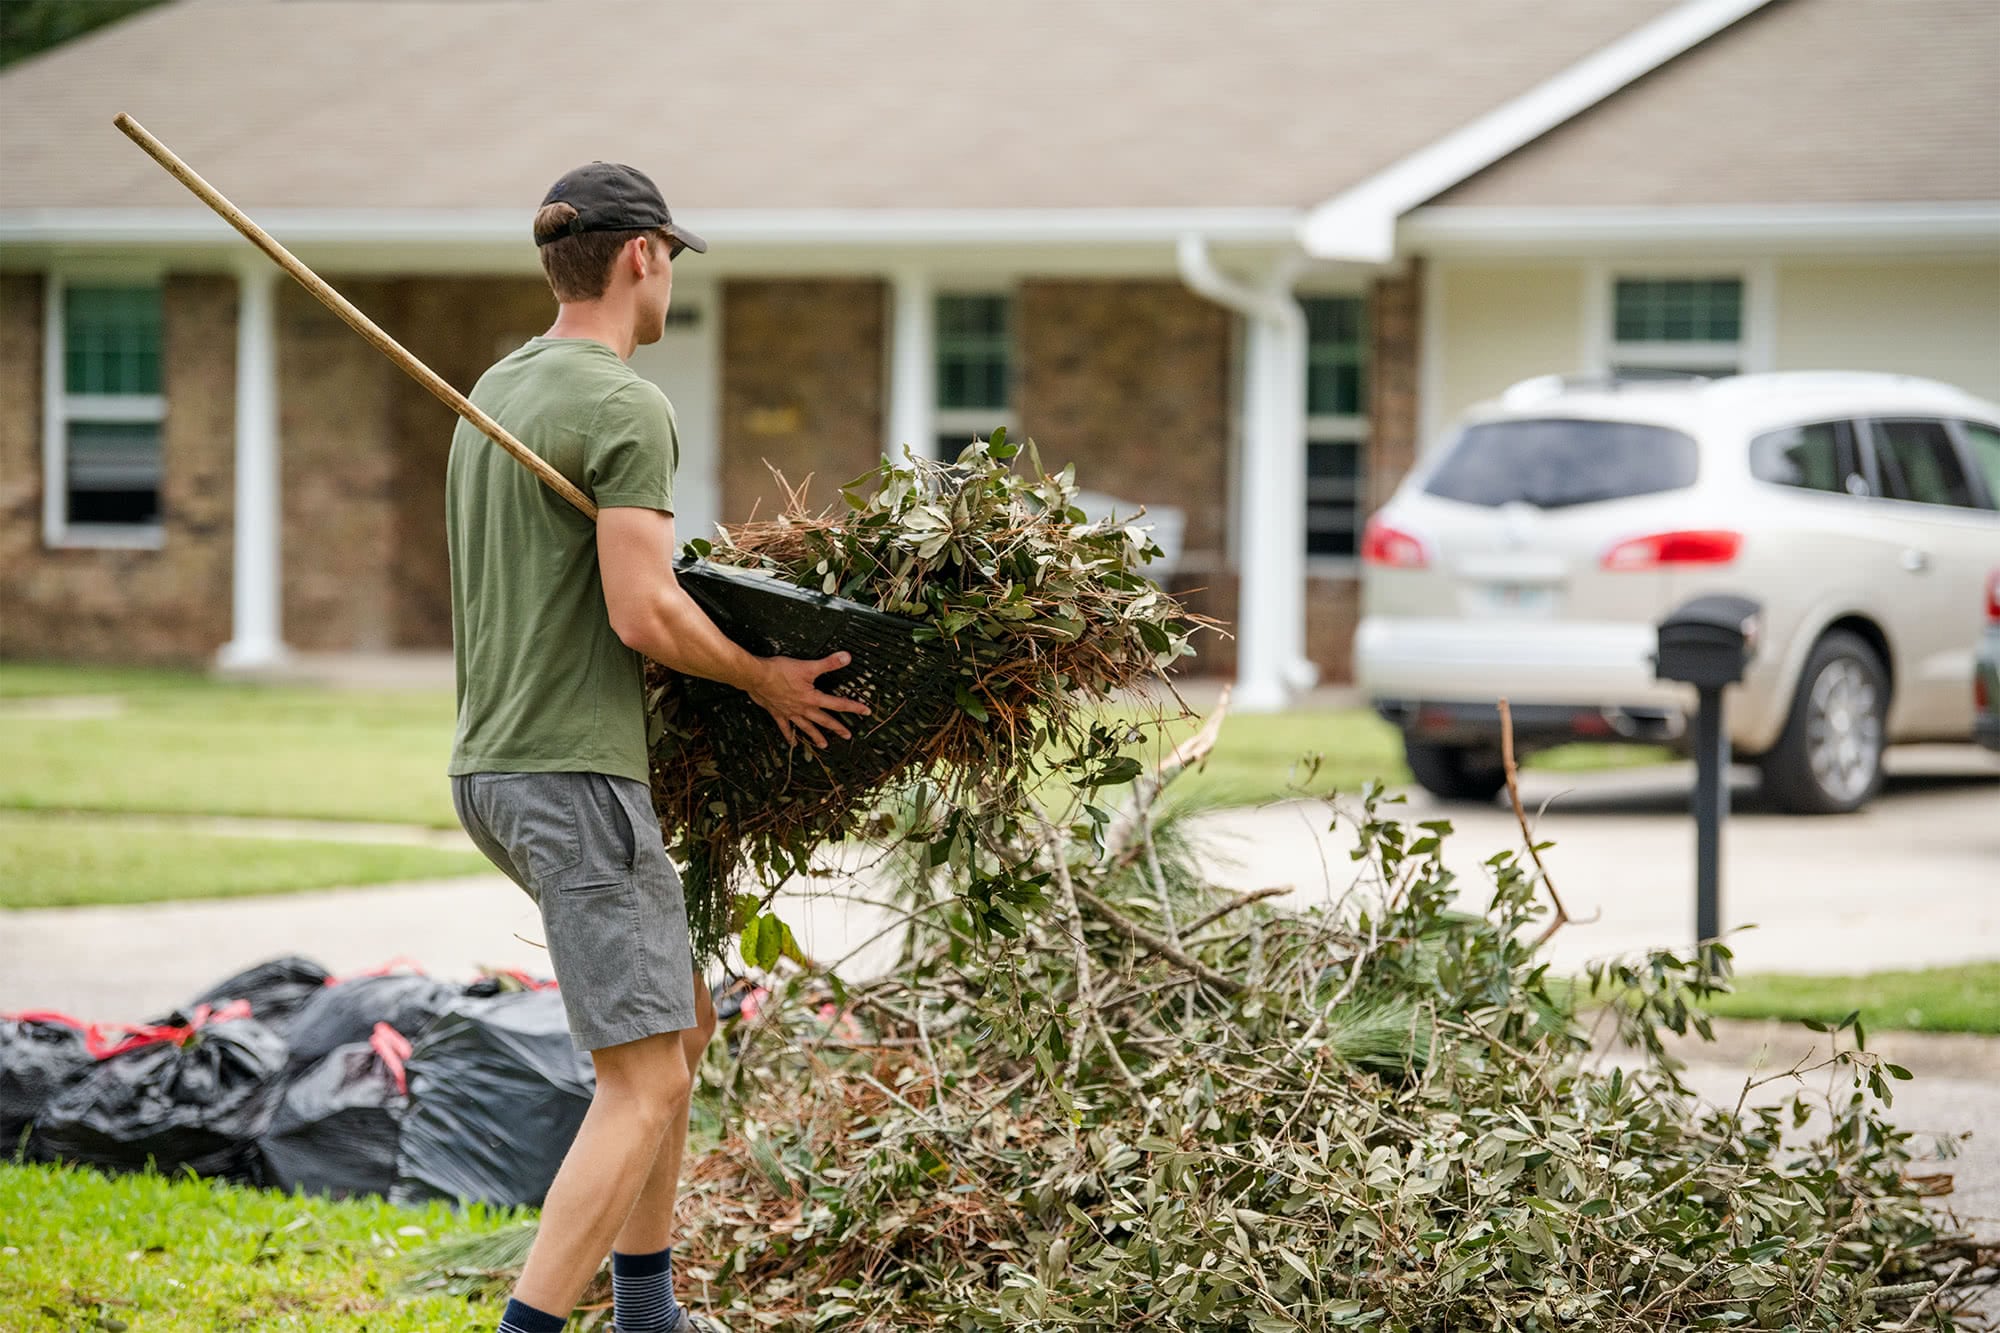 A male student cleans up debris in a nearby neighborhood